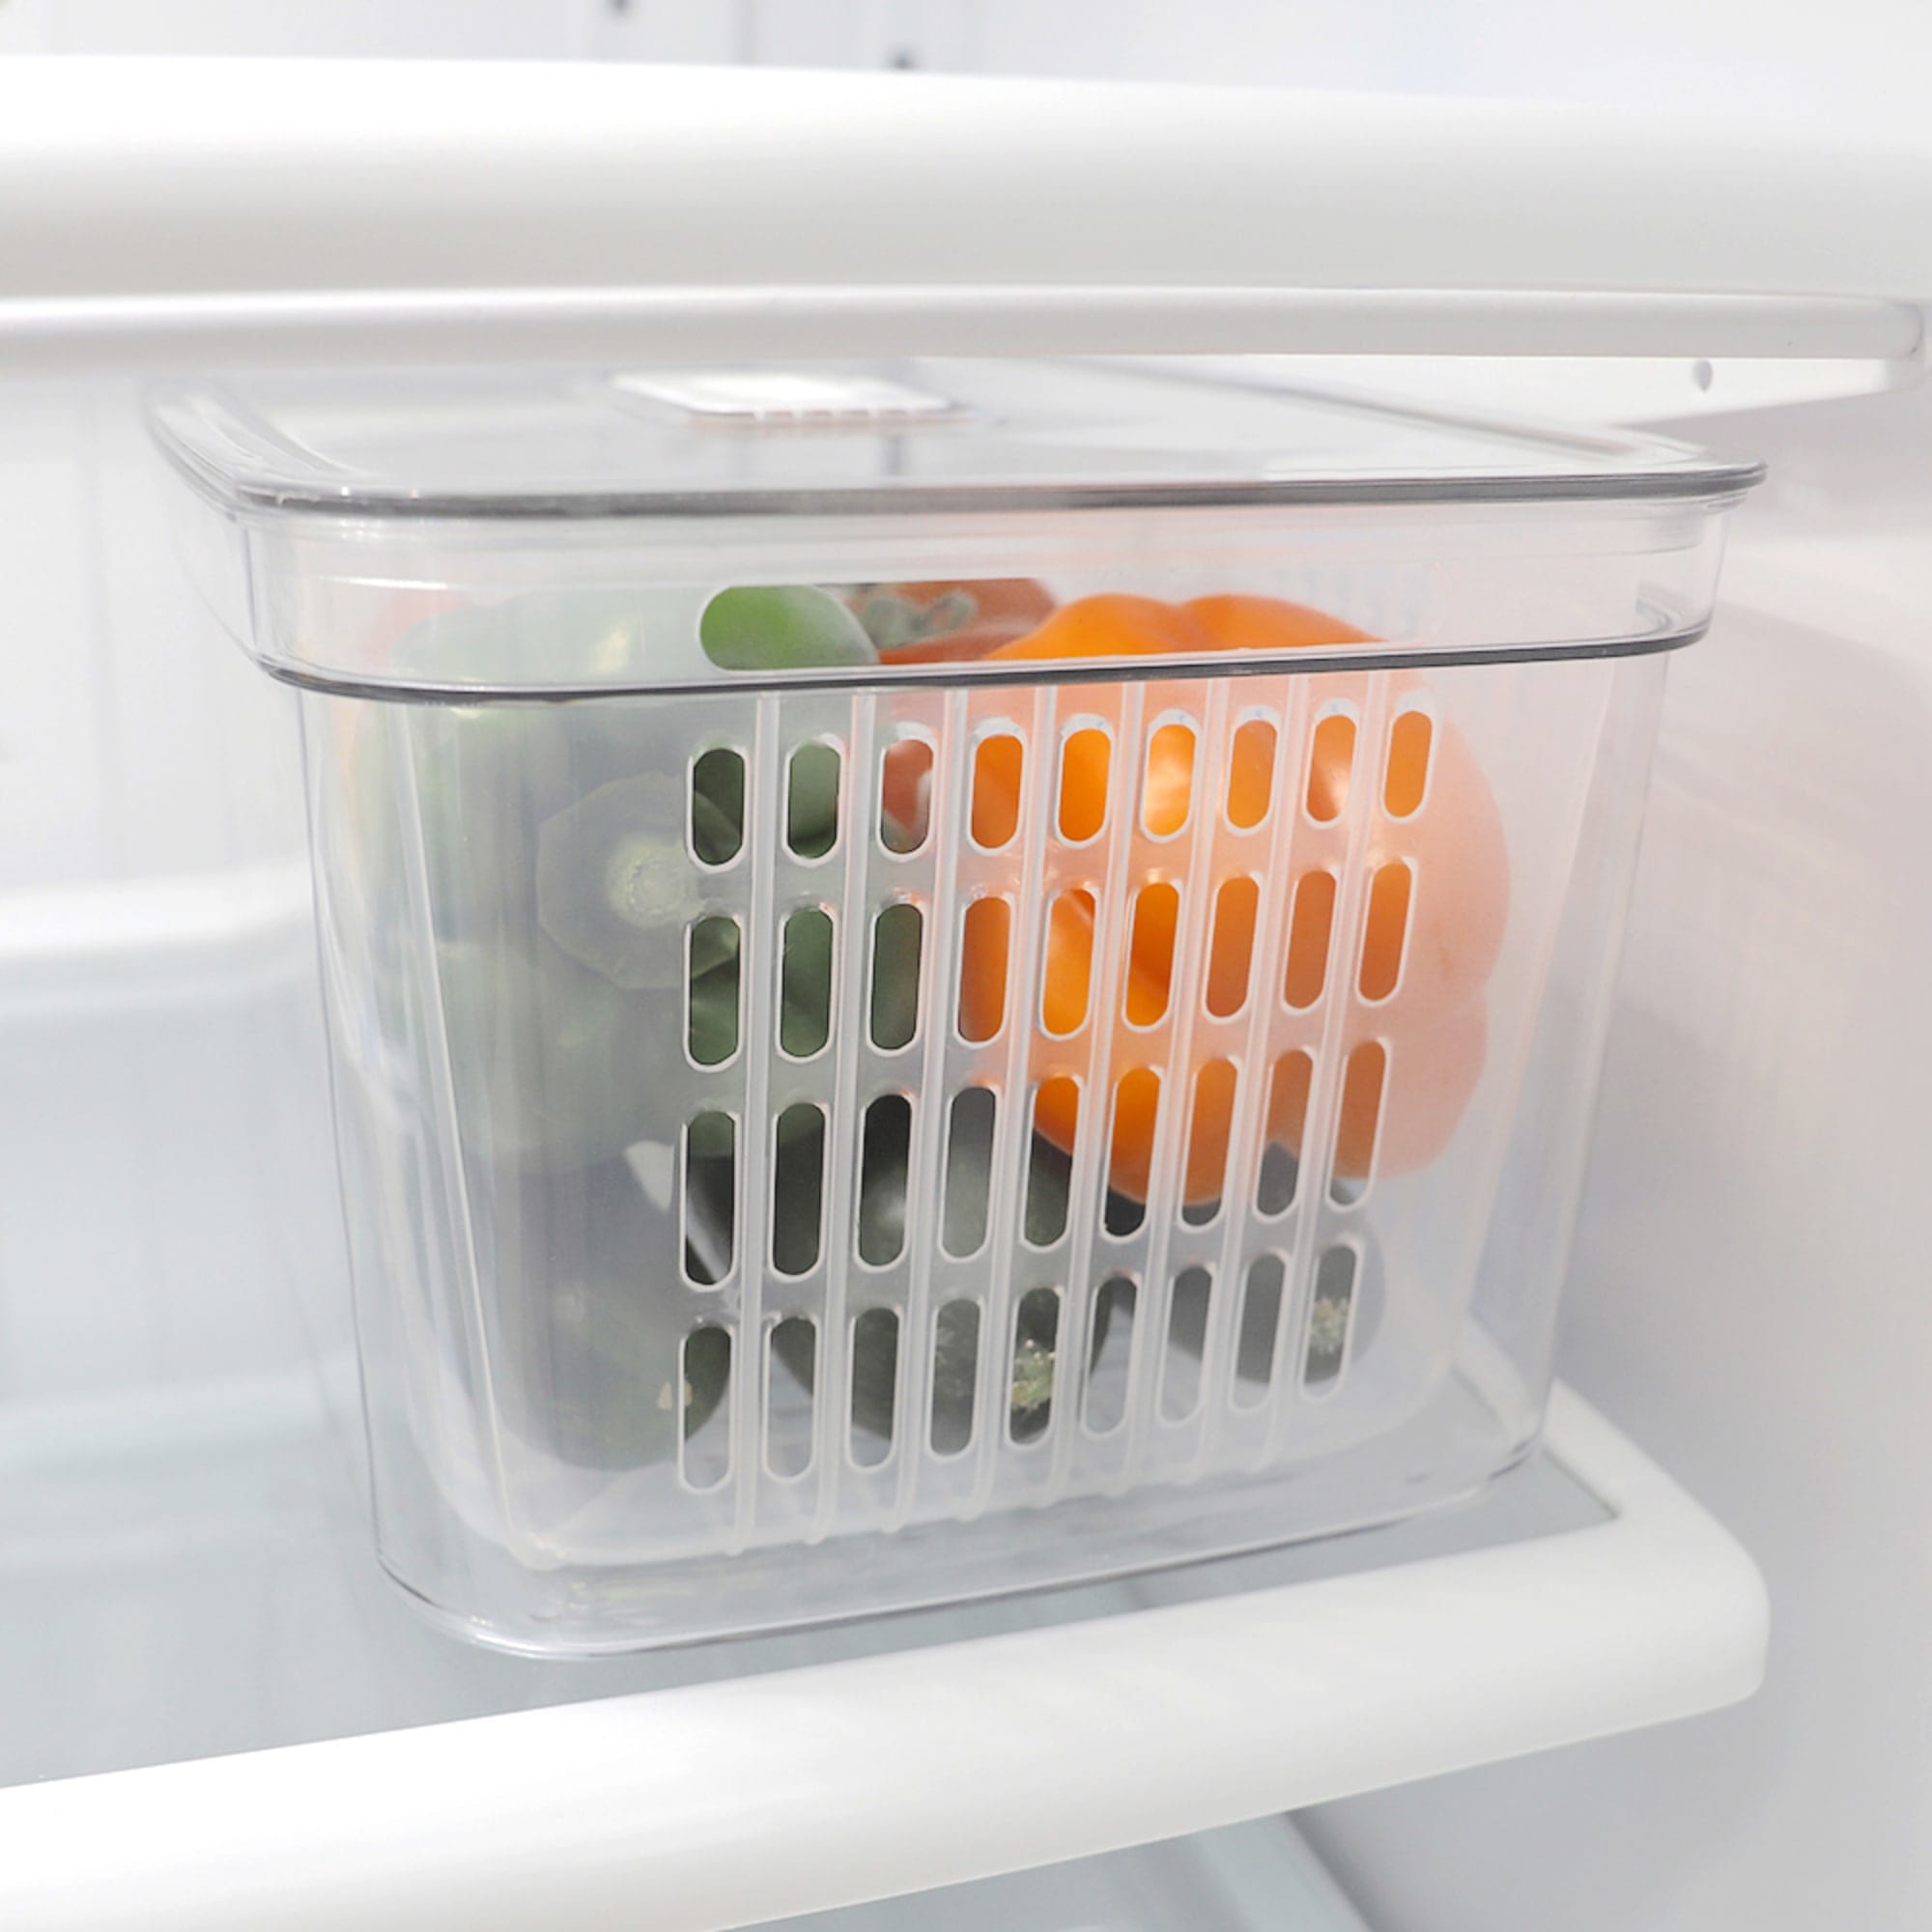 Home Basics Large Produce Saver with Removable Colander, Clear $8.00 EACH, CASE PACK OF 6